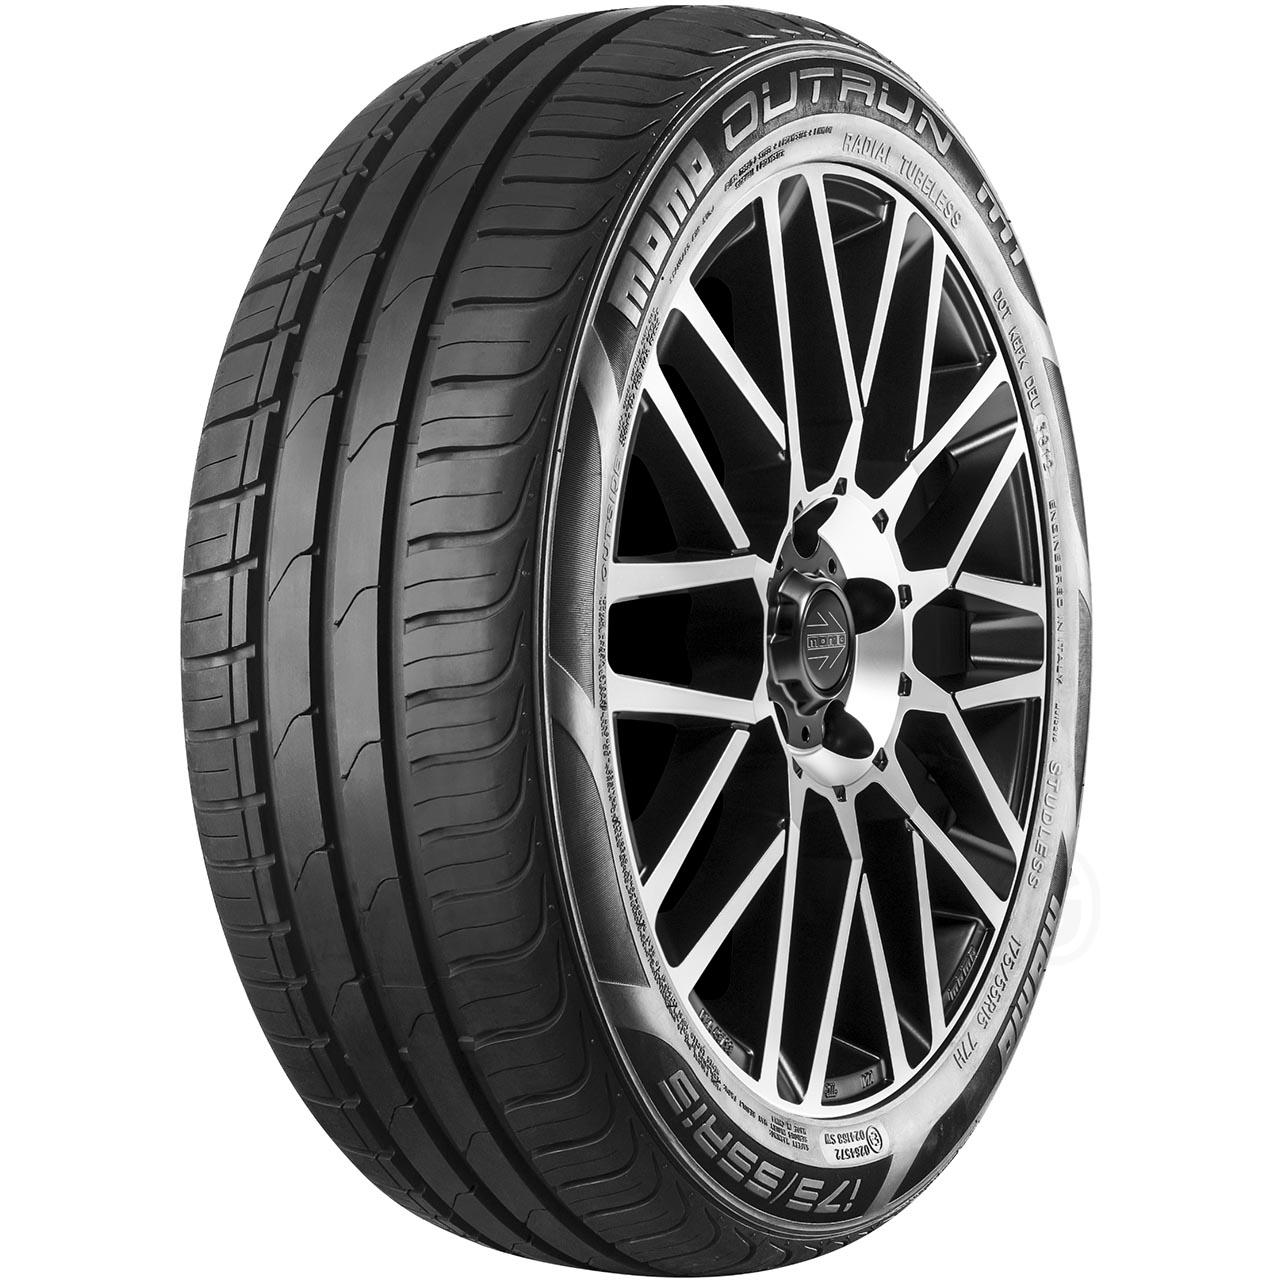 MOMO OUTRUN M1 S2 165/70R14 81T BSW